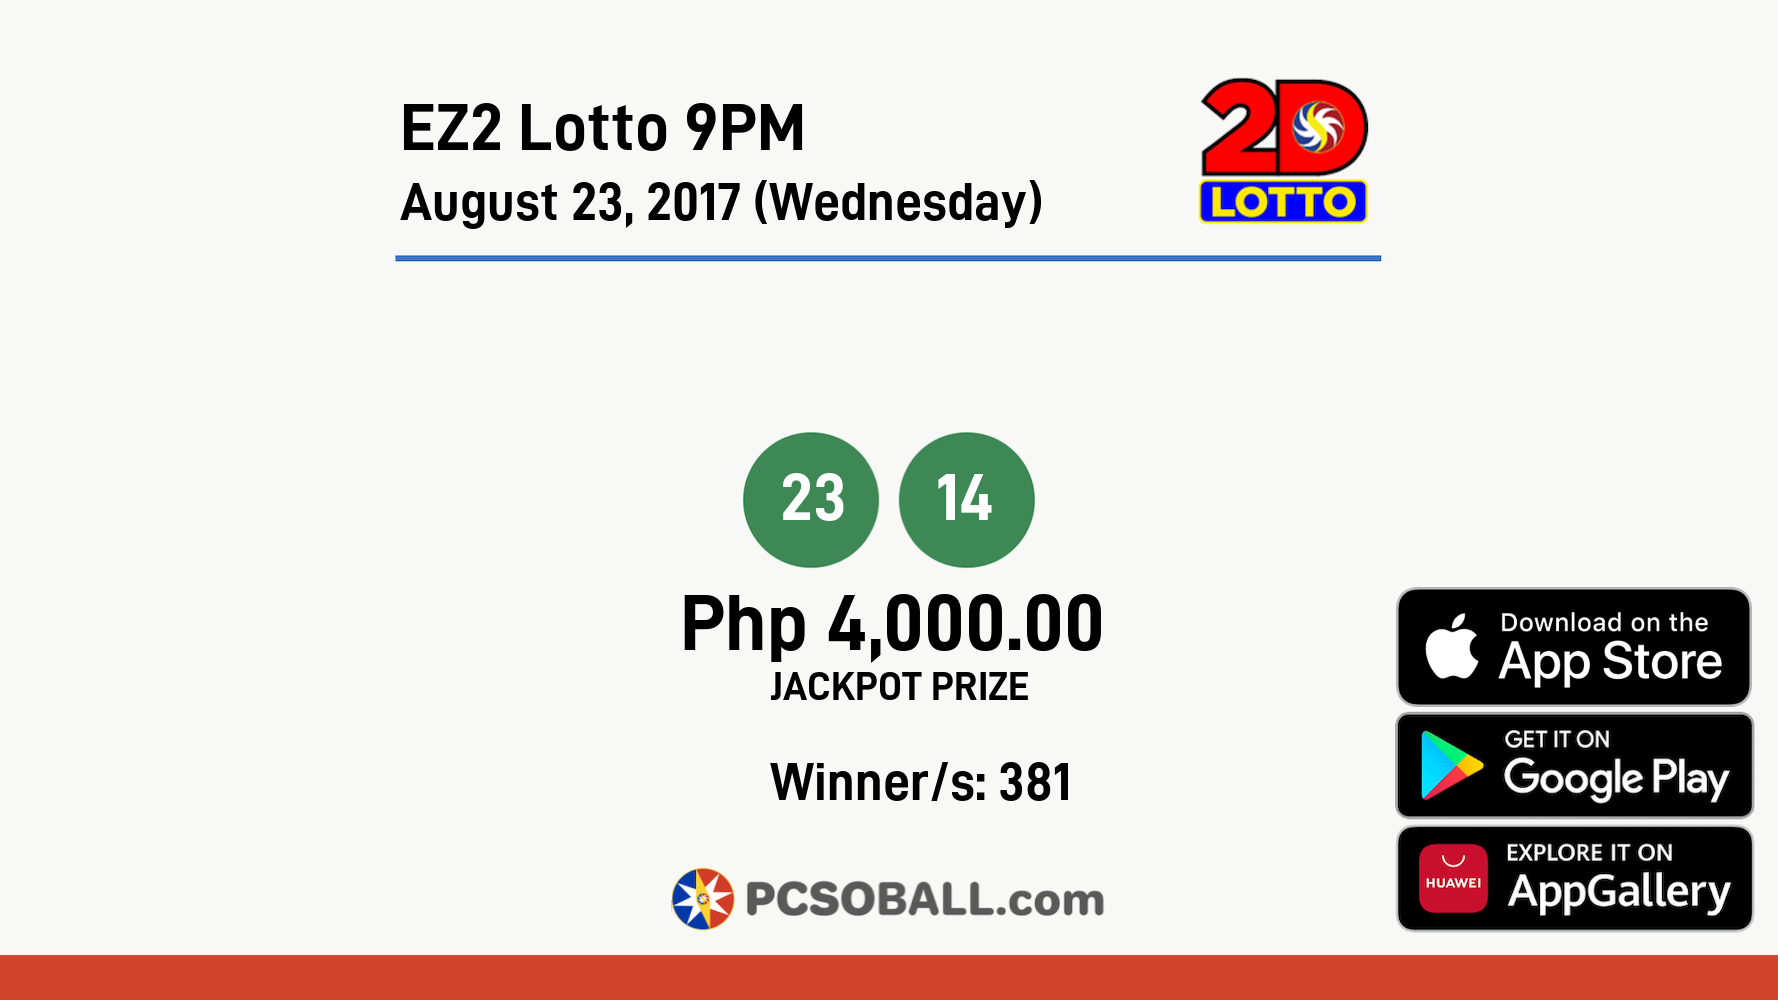 EZ2 Lotto 9PM August 23, 2017 (Wednesday) Result